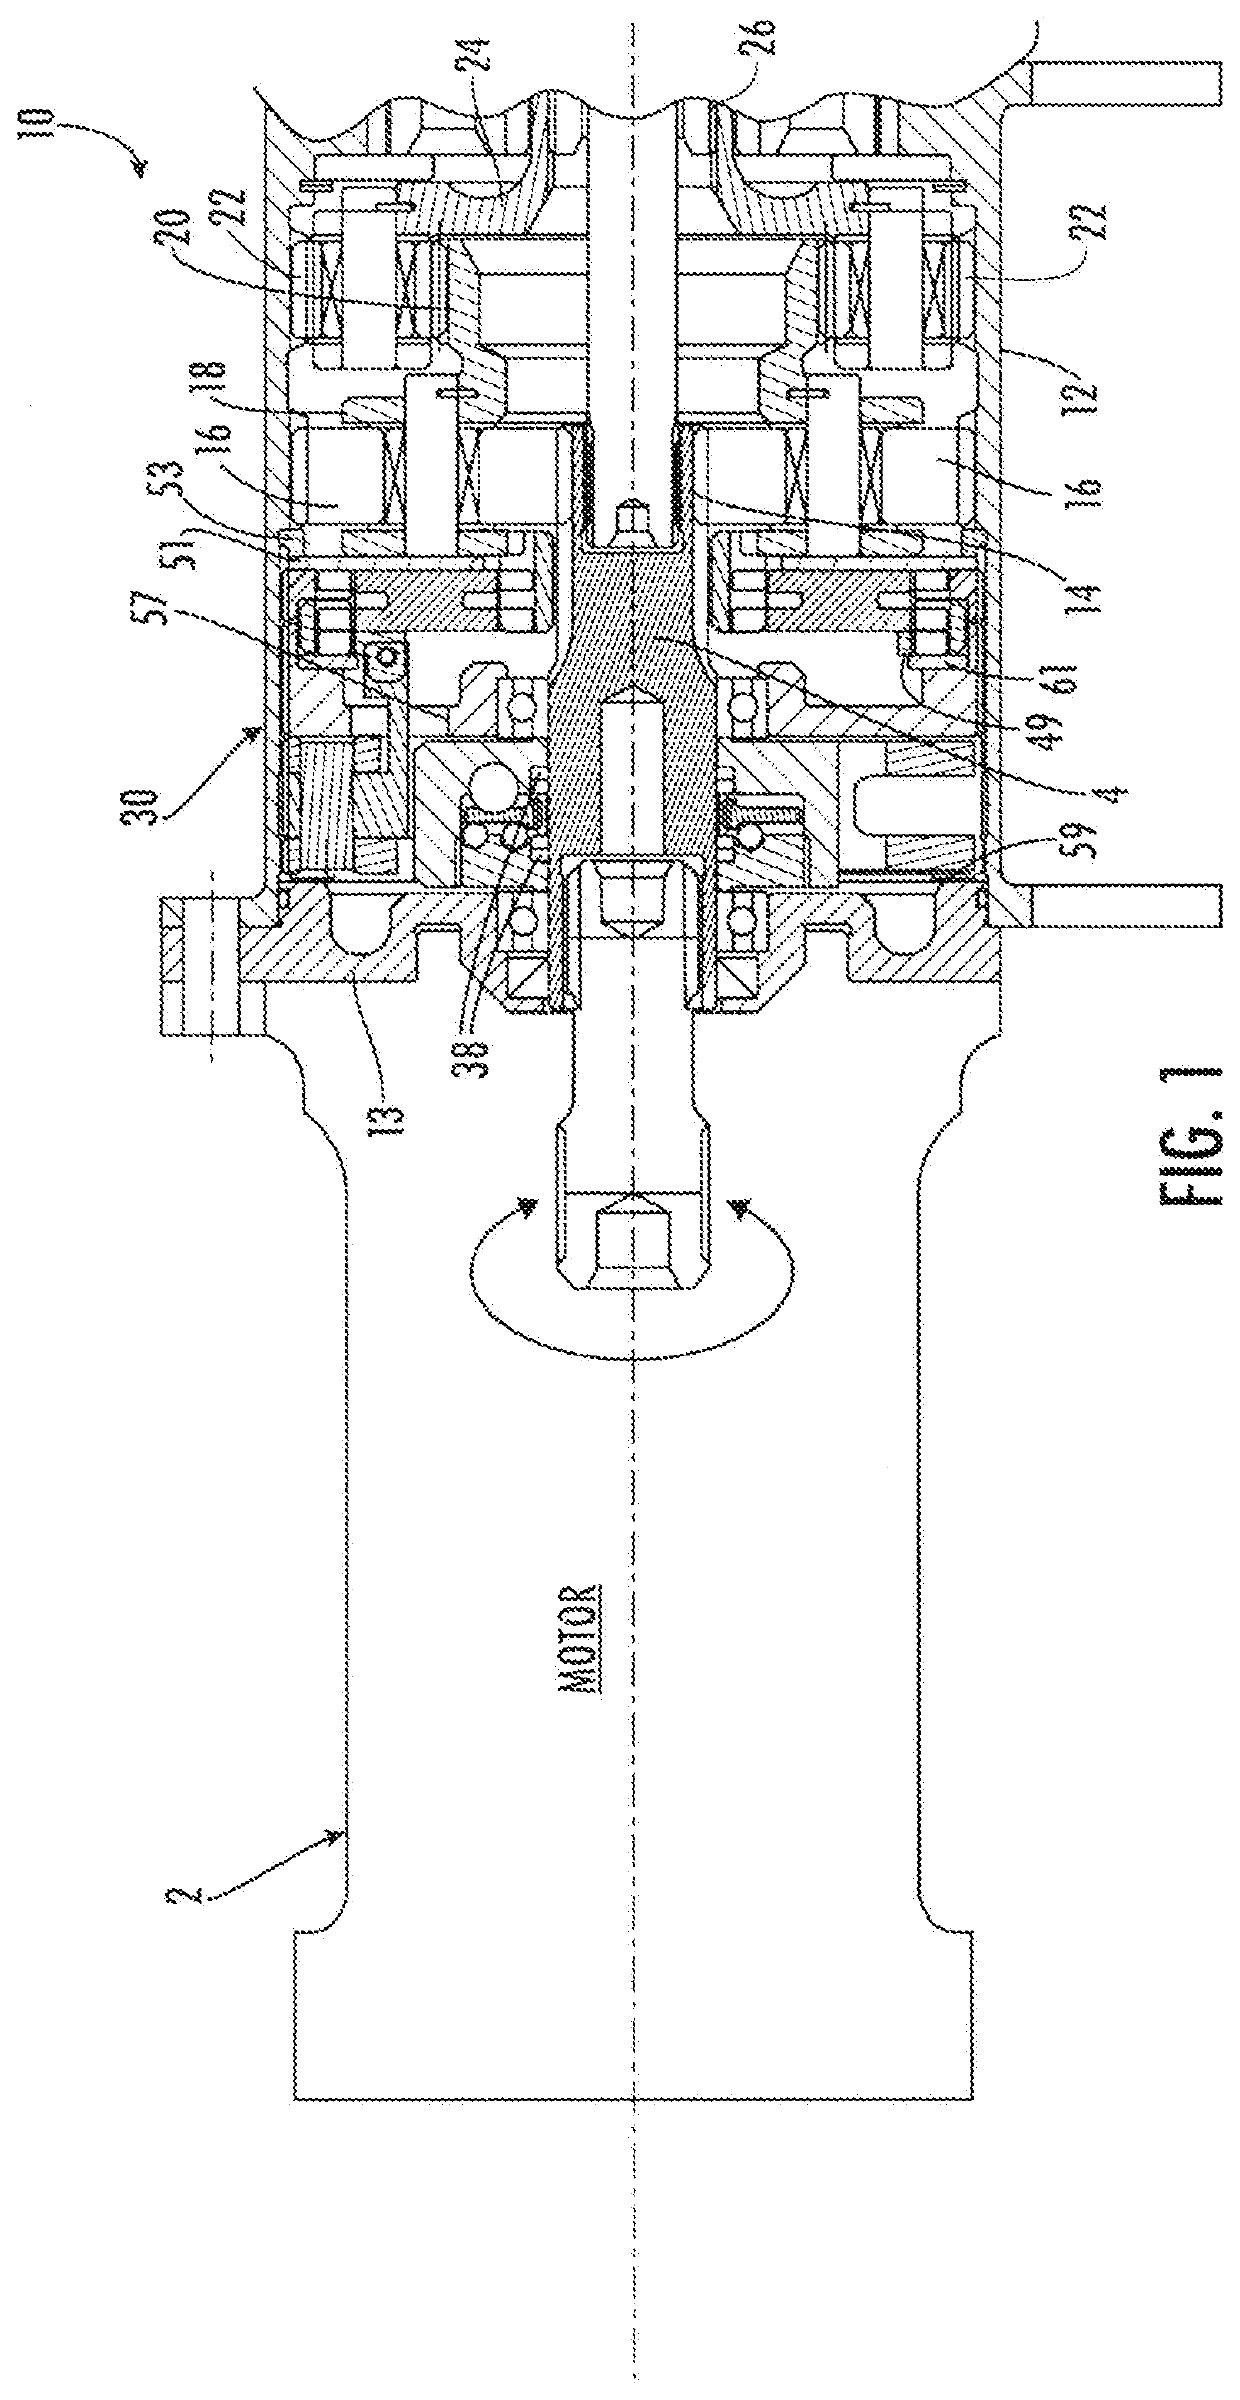 Single-use non-jamming stop module for rotary drive actuator